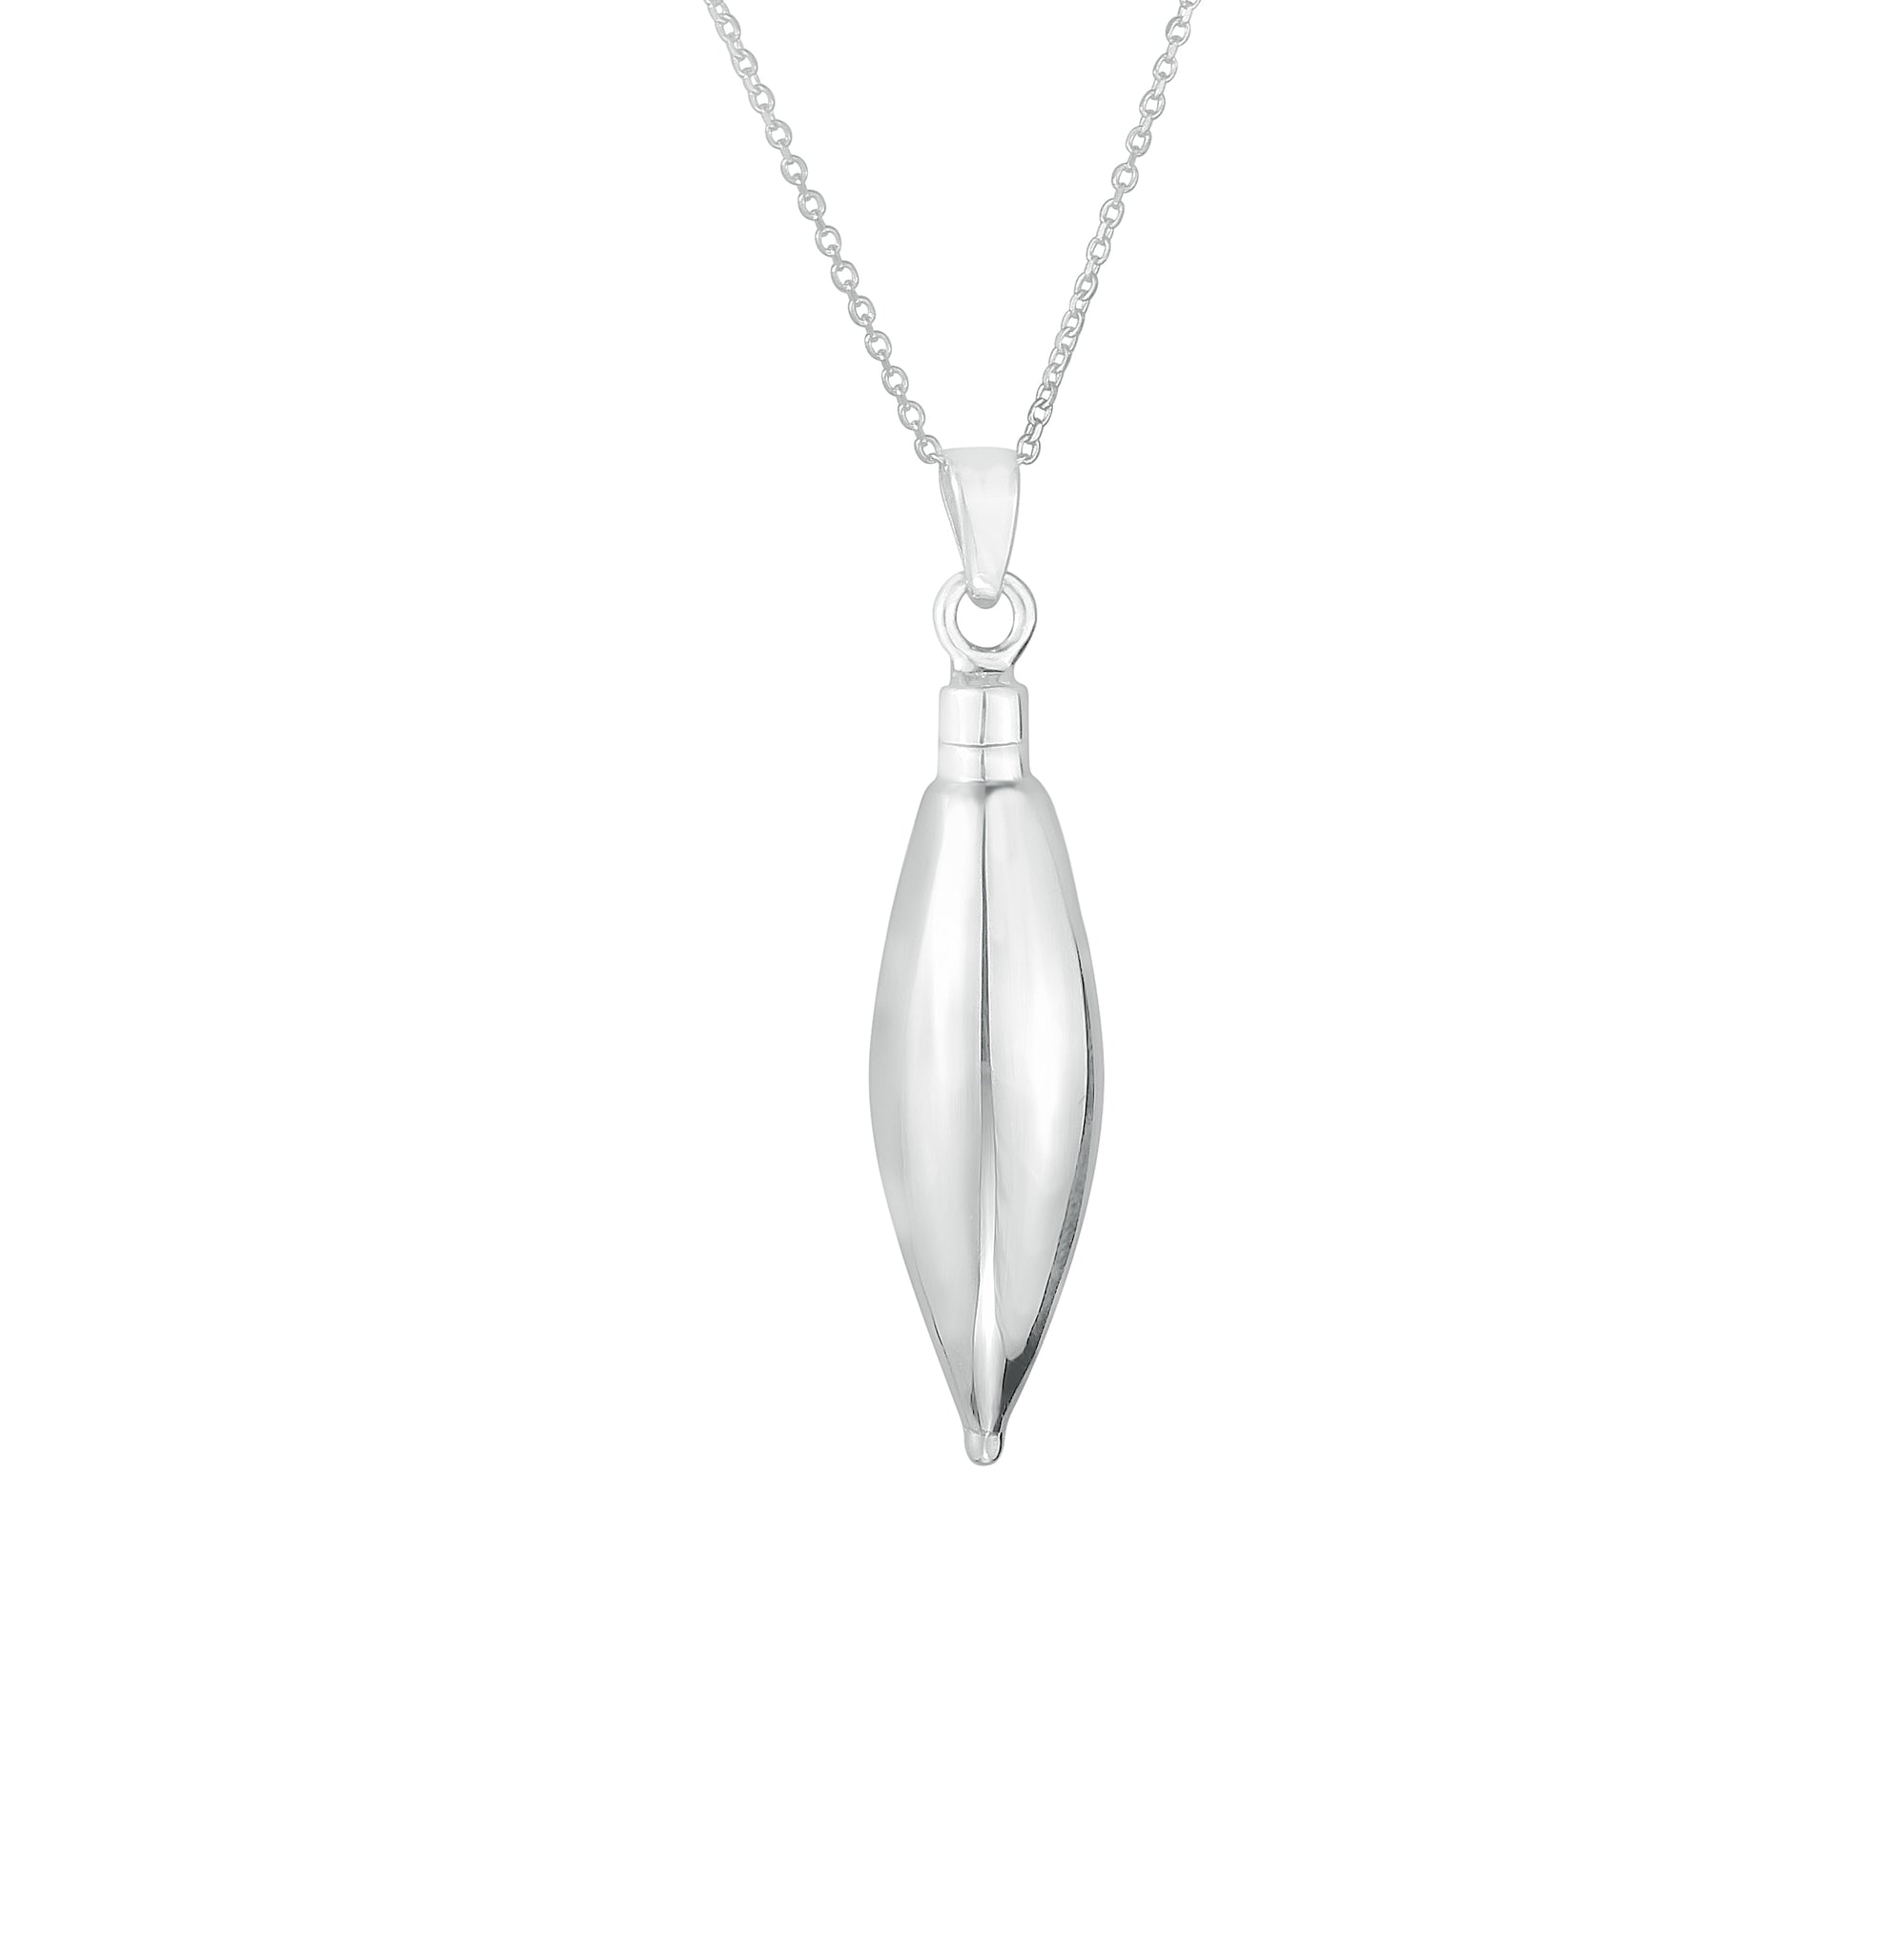 Stainless Steel Teardrop Cremation Iurn Pendant Necklace Pet Bird Ashes  Souvenir Guitar Pick Necklace For Hair Keepake And Ashes From  Weikuijewelry, $2.01 | DHgate.Com